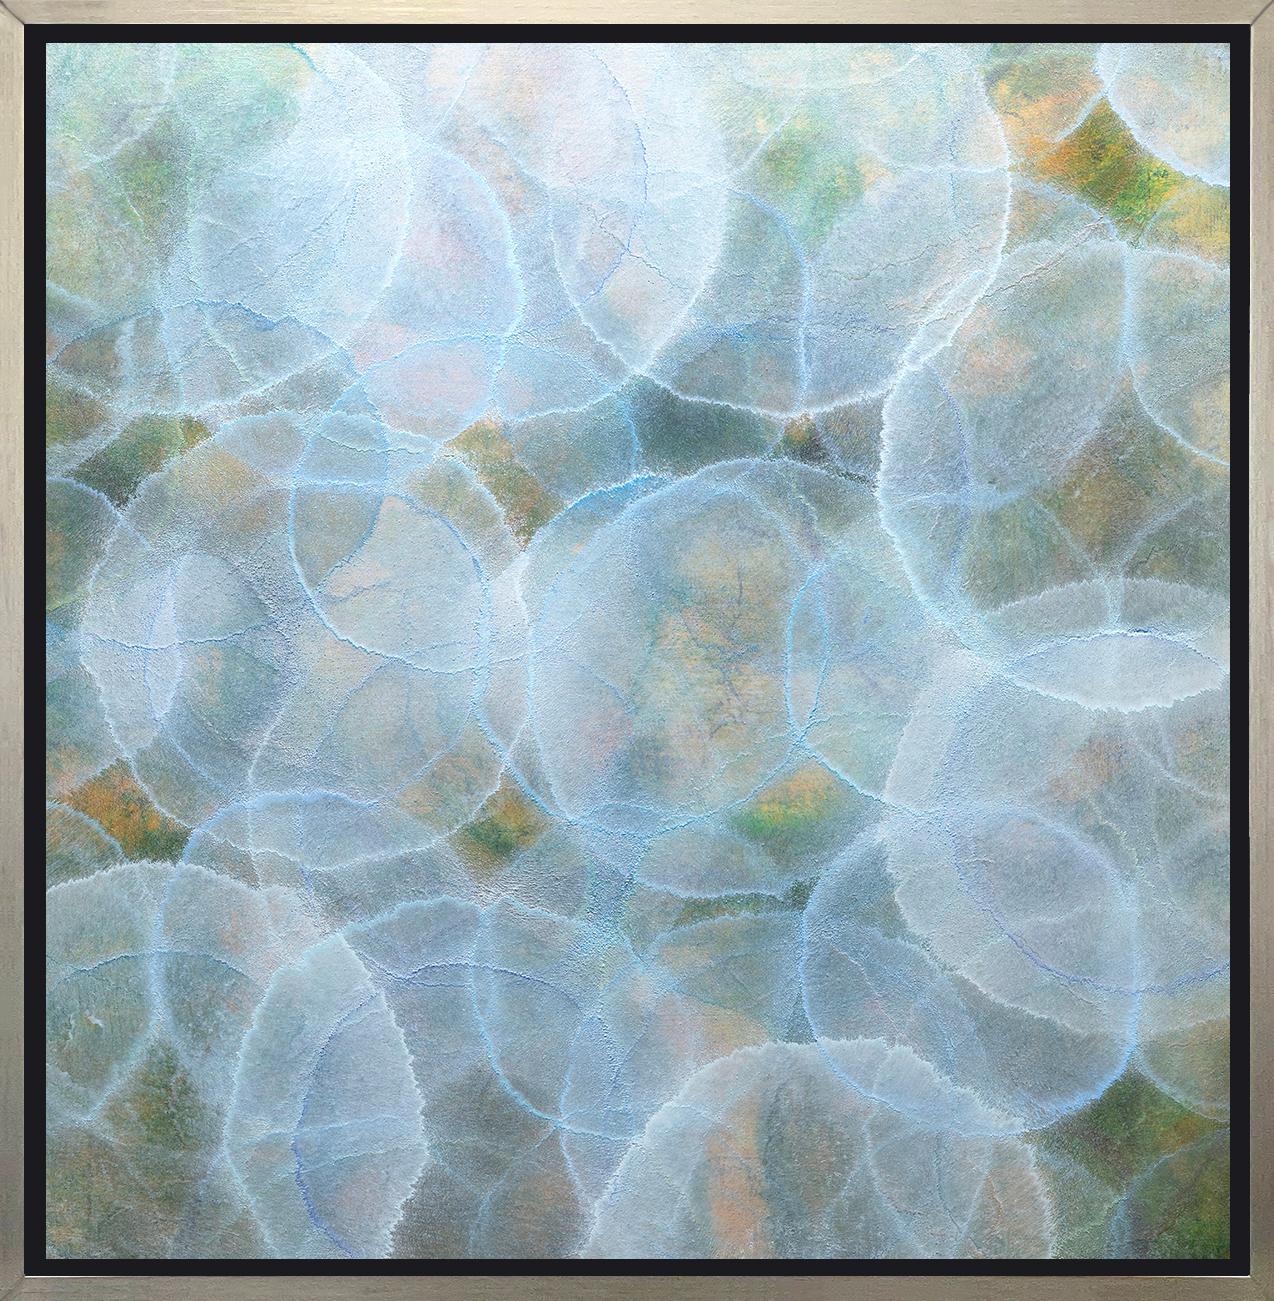 Roger Mudre Abstract Print - "Staphisagria, " Framed Limited Edition Giclee Print, 36" x 36"